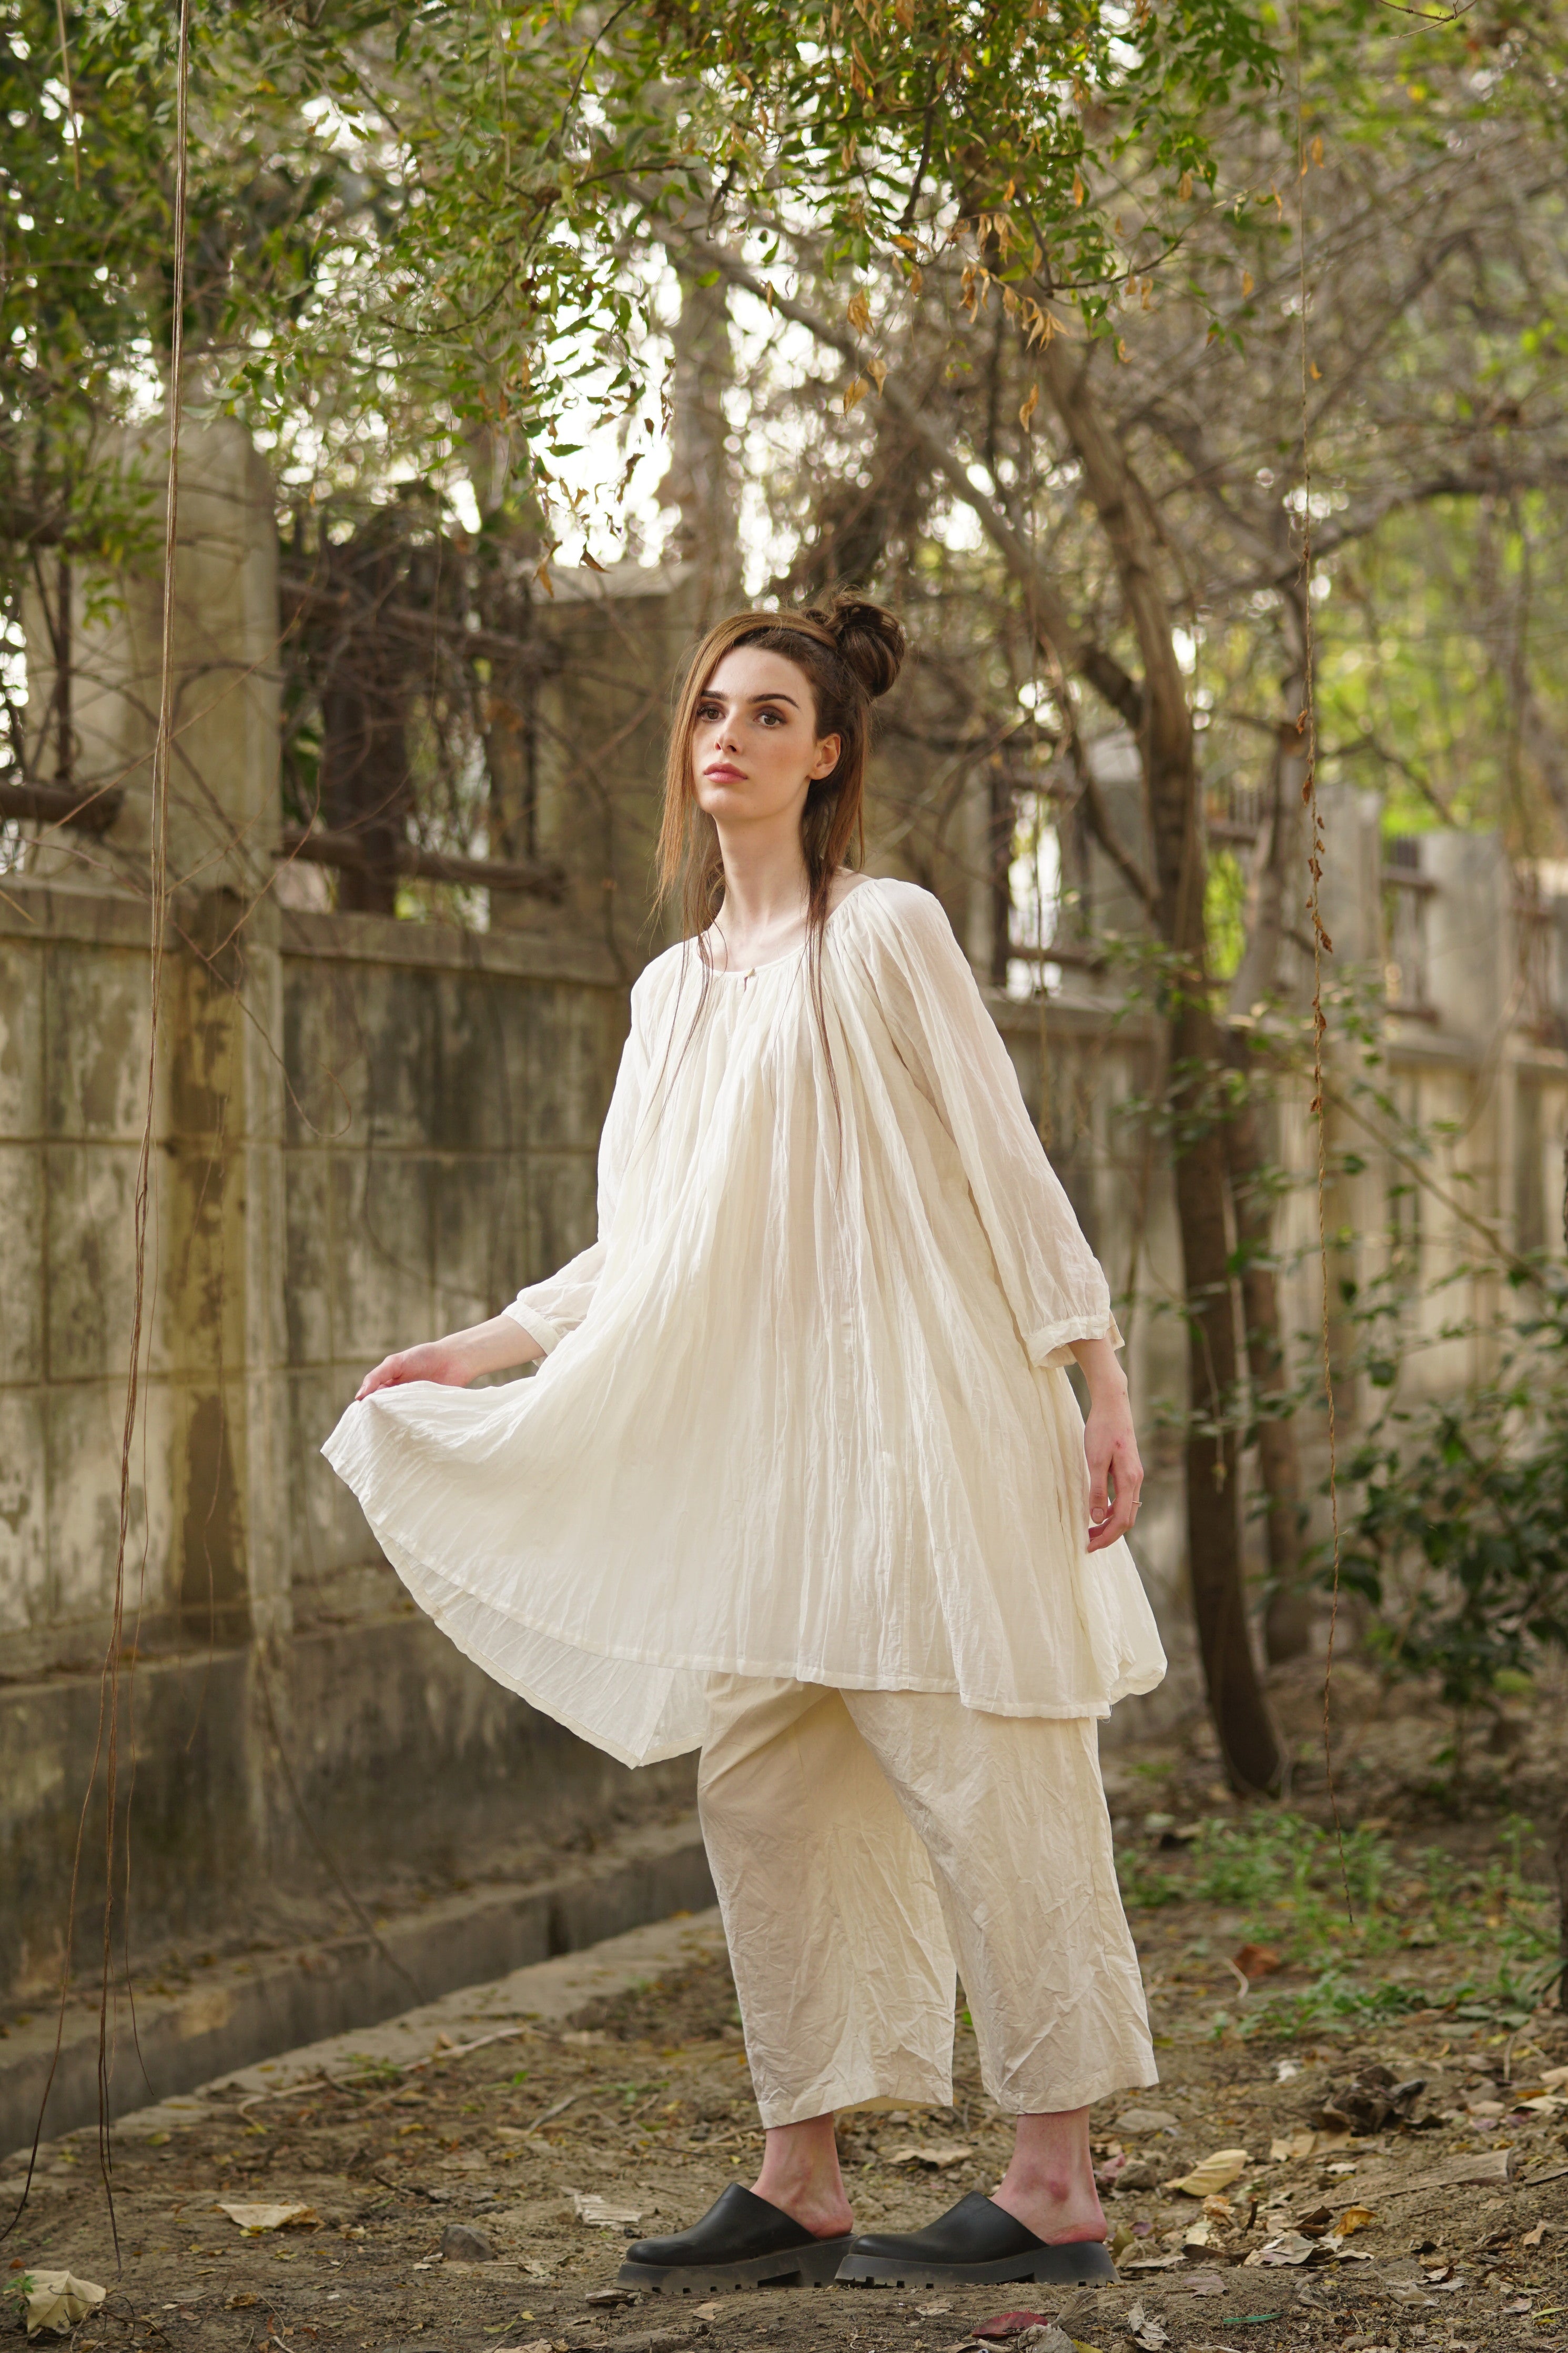 A MegbyDesign model is wearing a tunic style dress made from a soft blend of silk and cotton